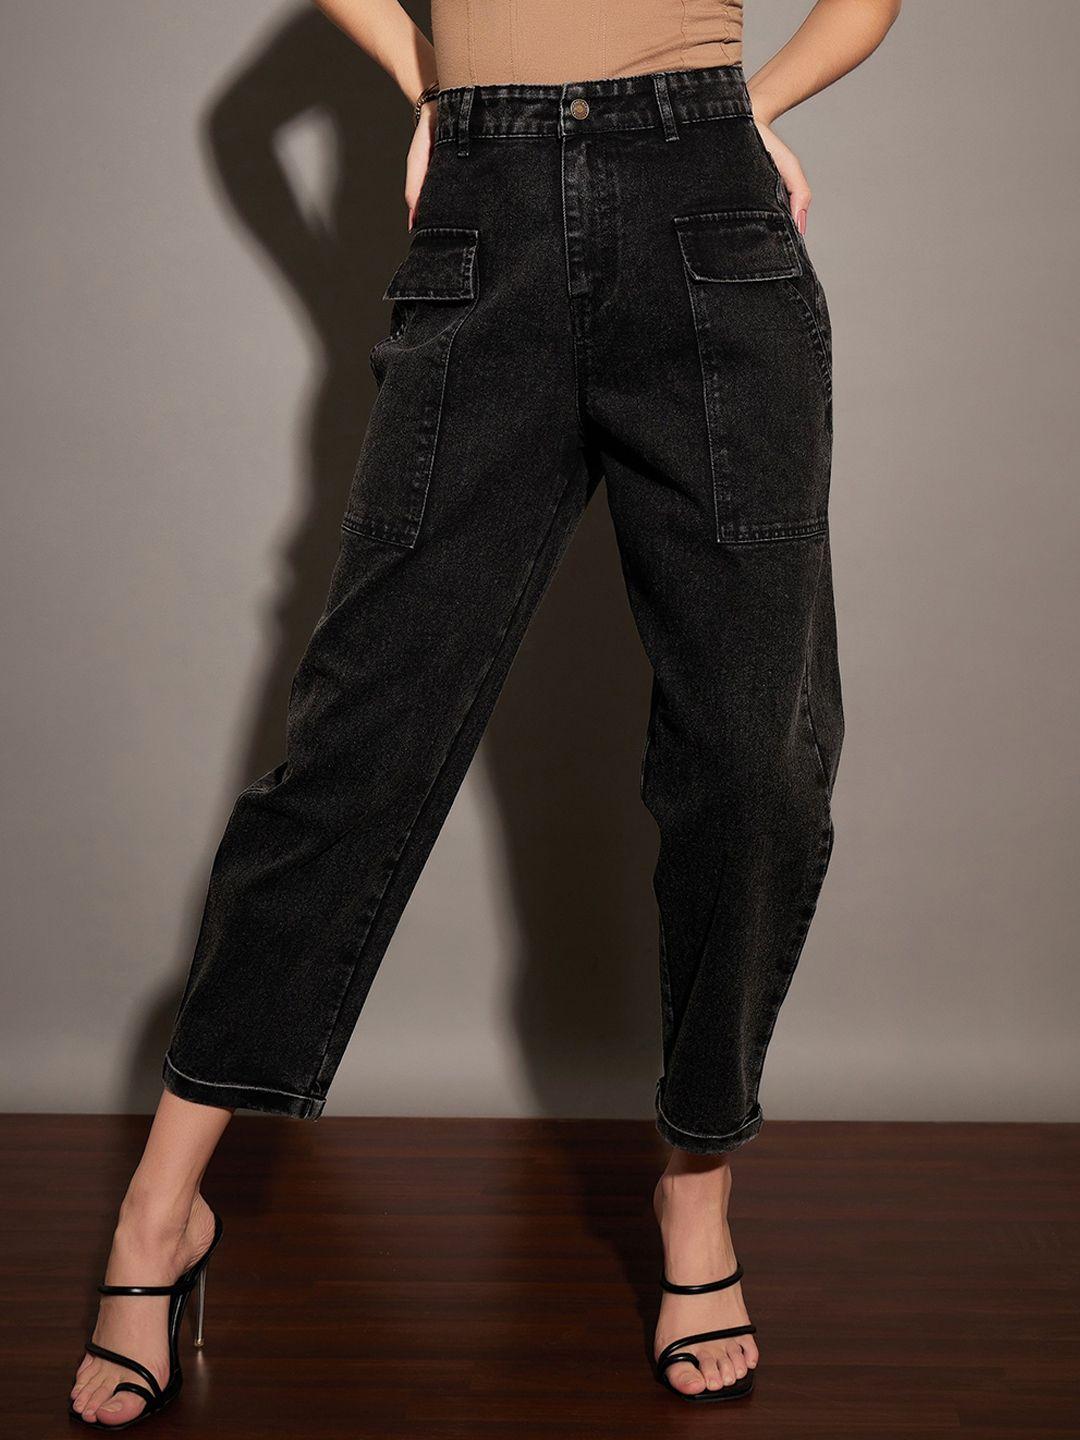 SASSAFRAS Black High-Rise Acid Wash Cropped Clean Look Stretchable Jeans